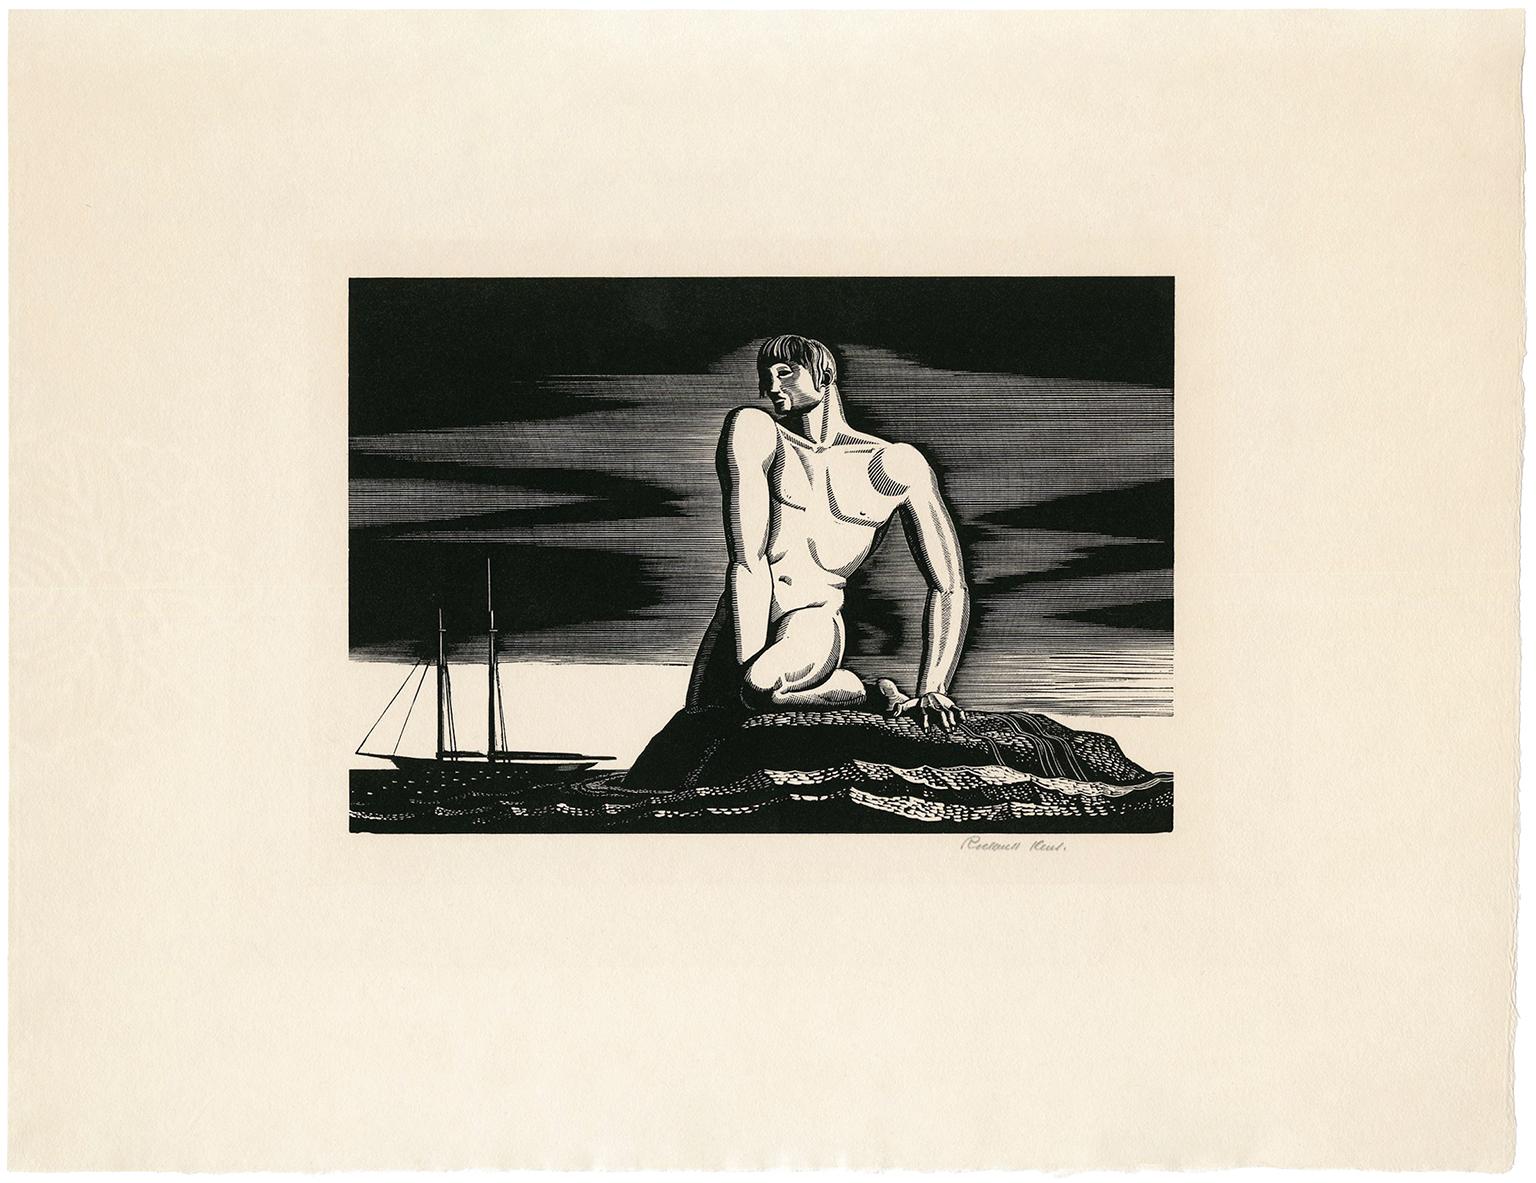 'The Bather' — 1930s American Modernism - Print by Rockwell Kent